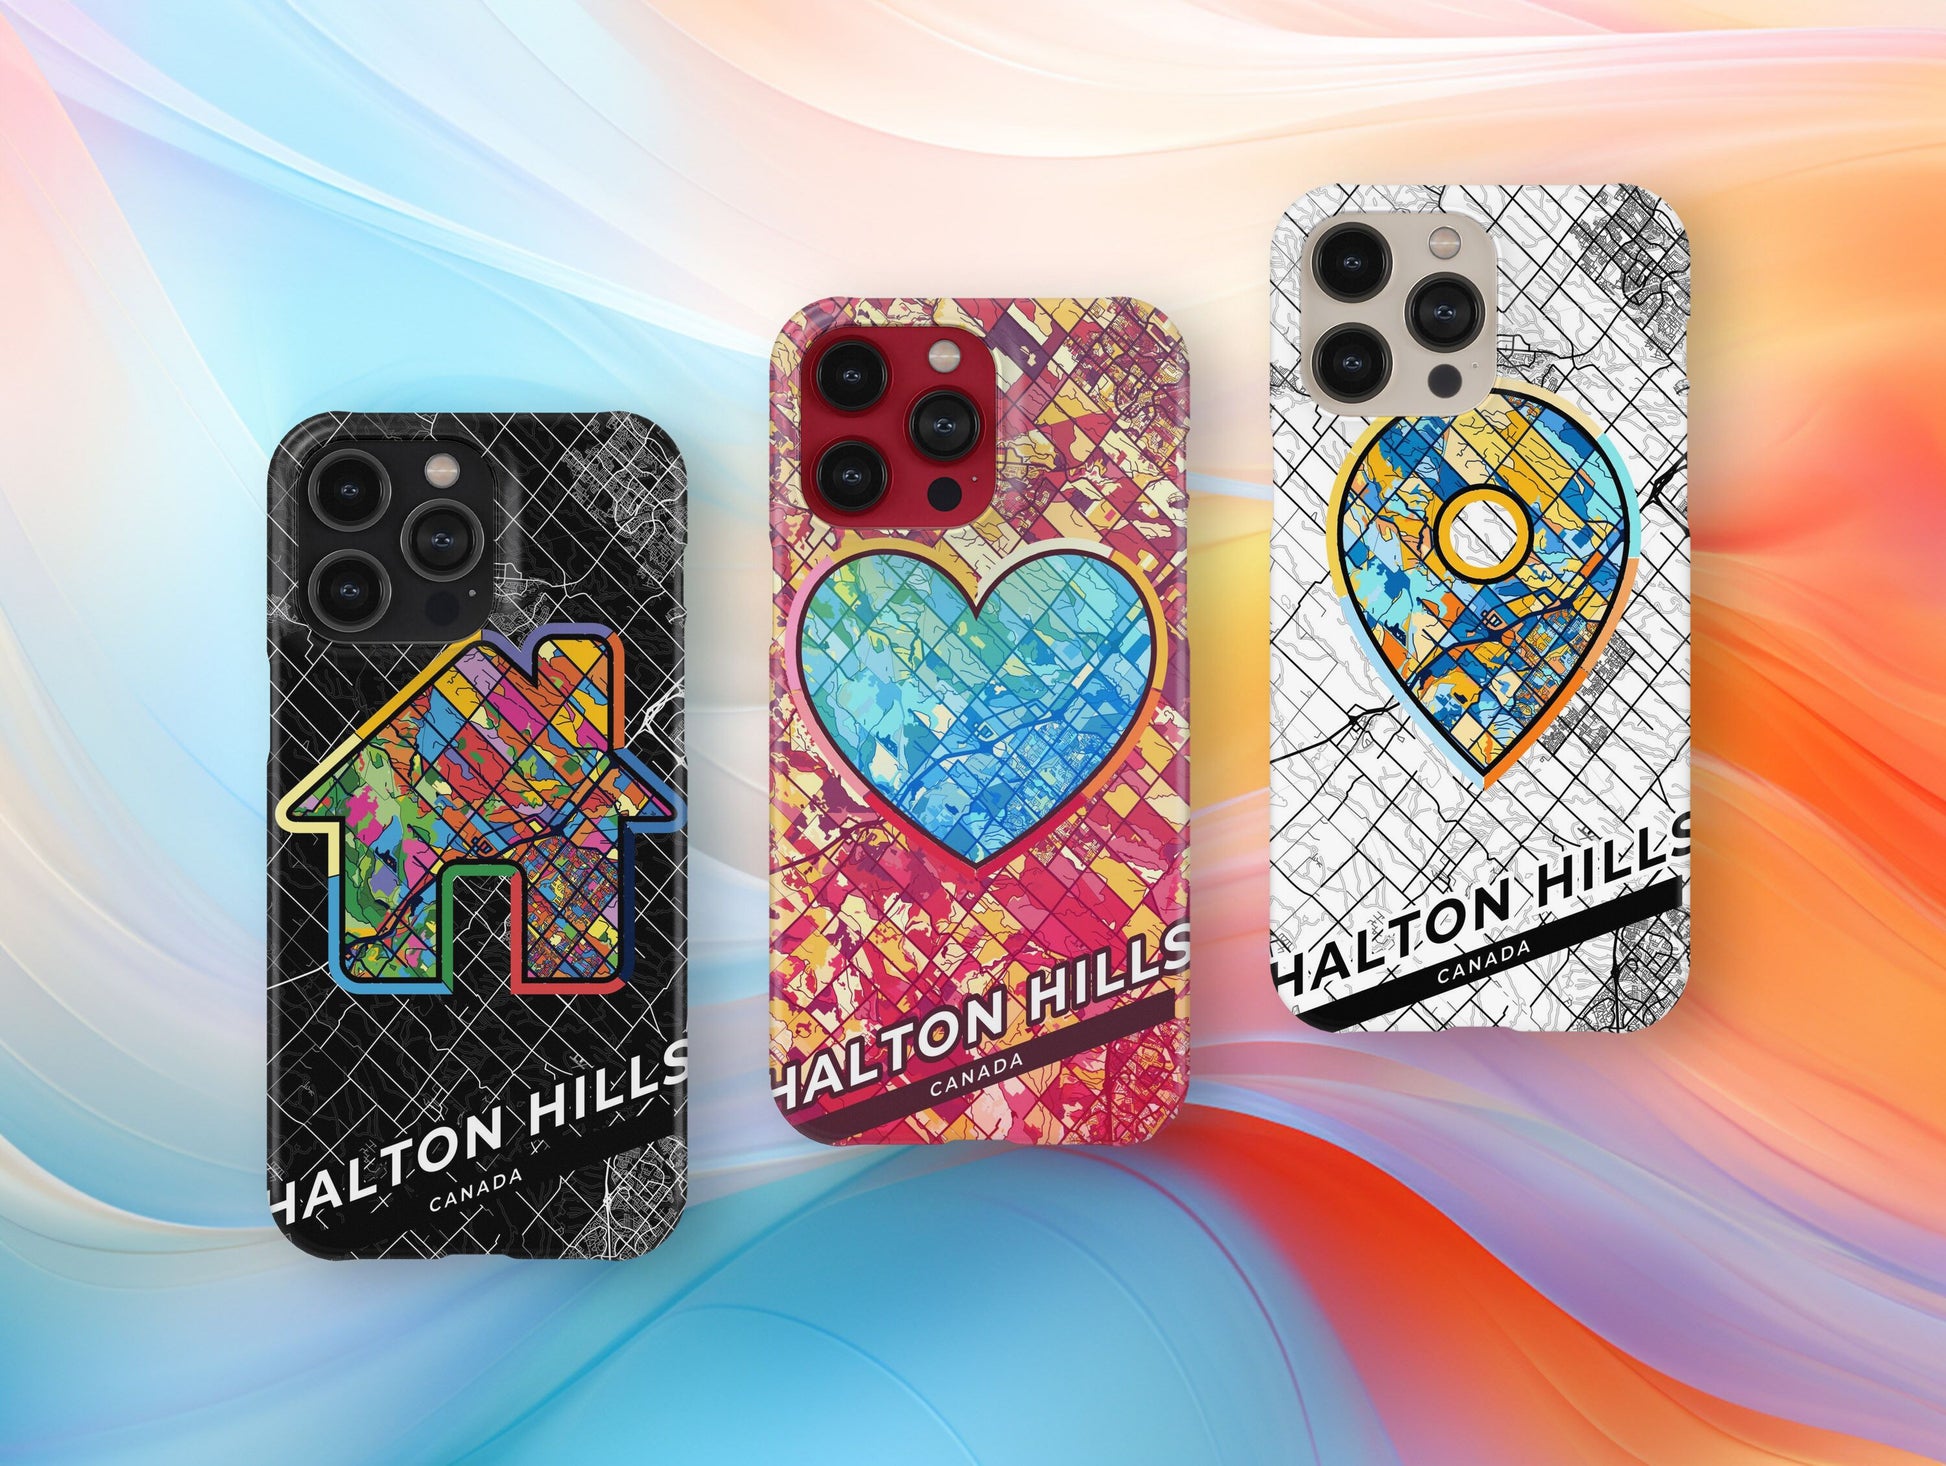 Halton Hills Canada slim phone case with colorful icon. Birthday, wedding or housewarming gift. Couple match cases.